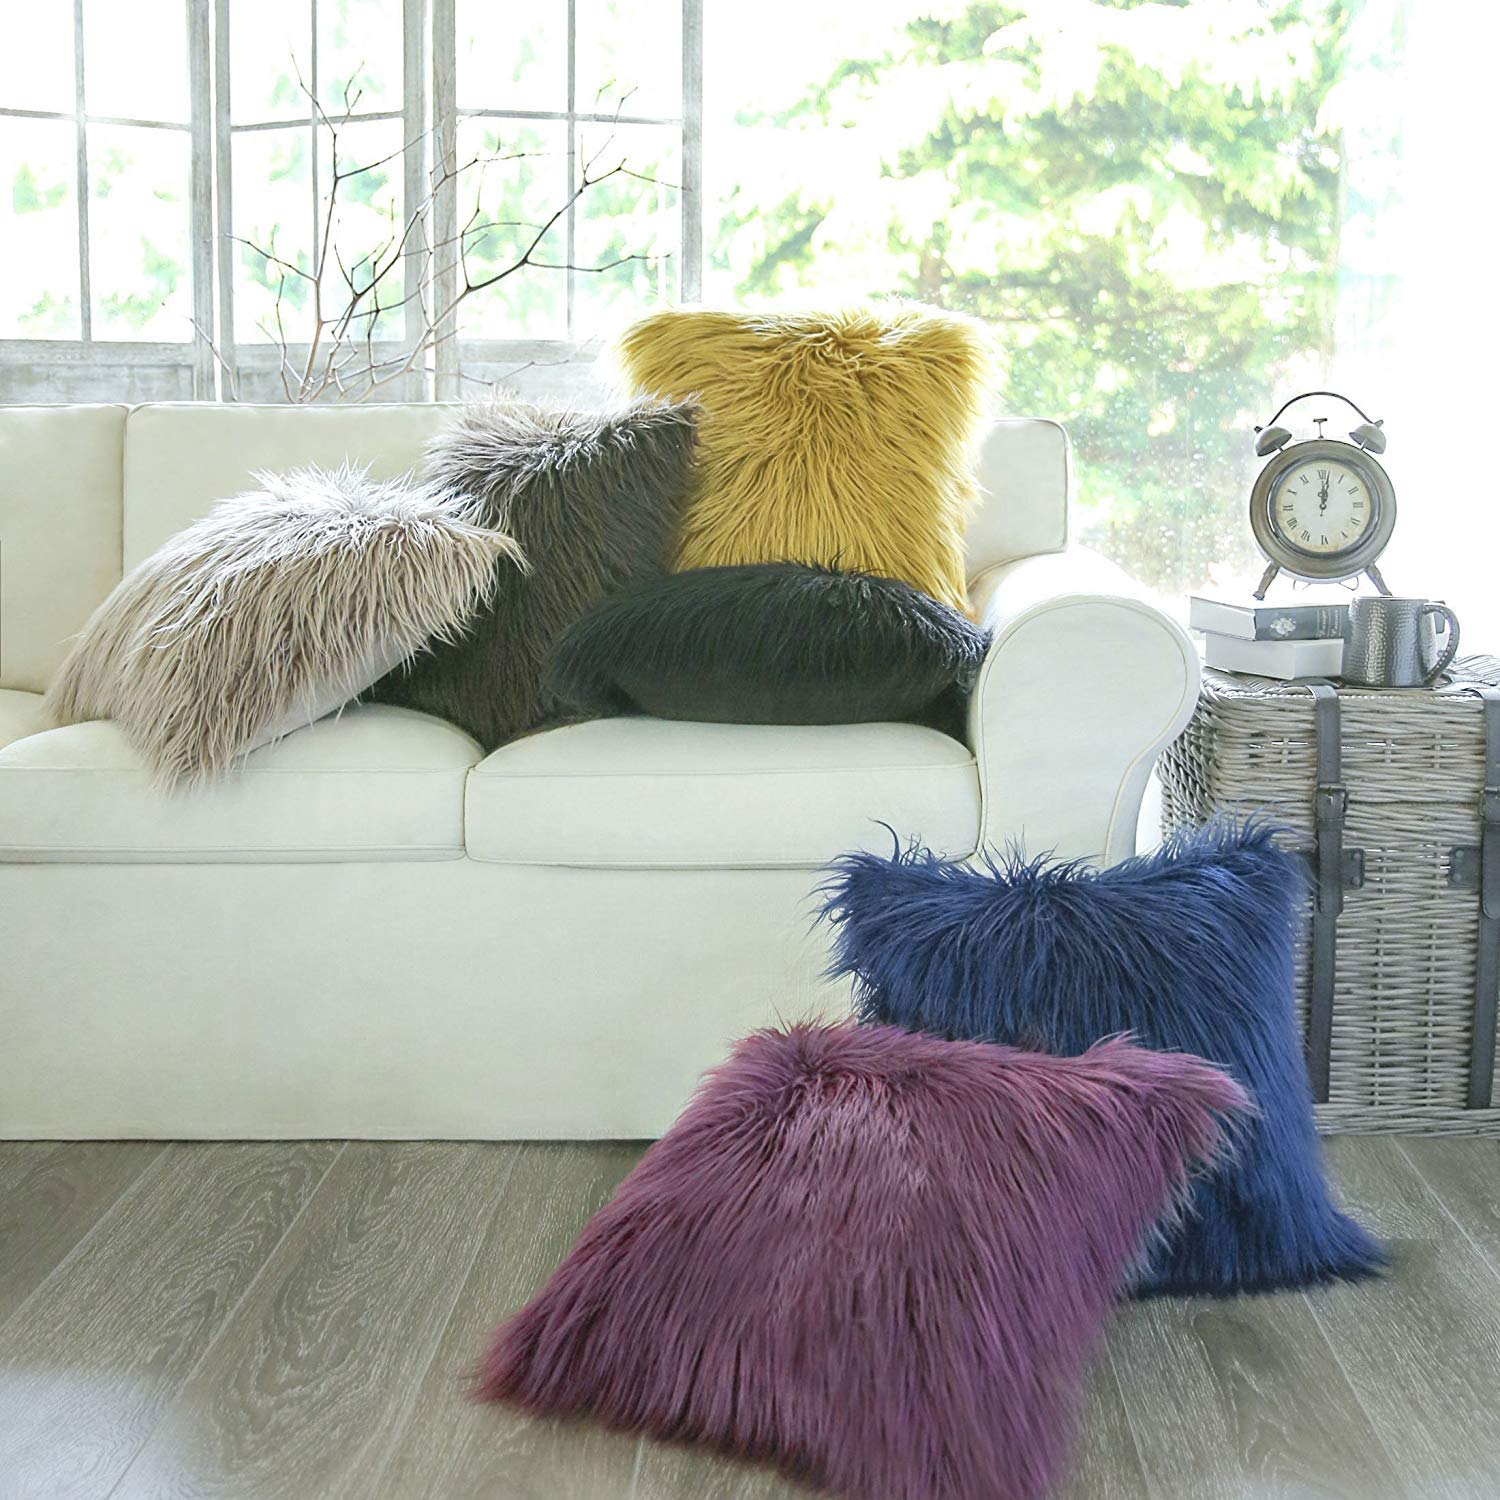 Fur Throw Pillows Fluffy Pillow Covers, Set of 2 Faux Plush Cushion Merino  Pillows Case Couch Bed Living Room Car Chair 18x18